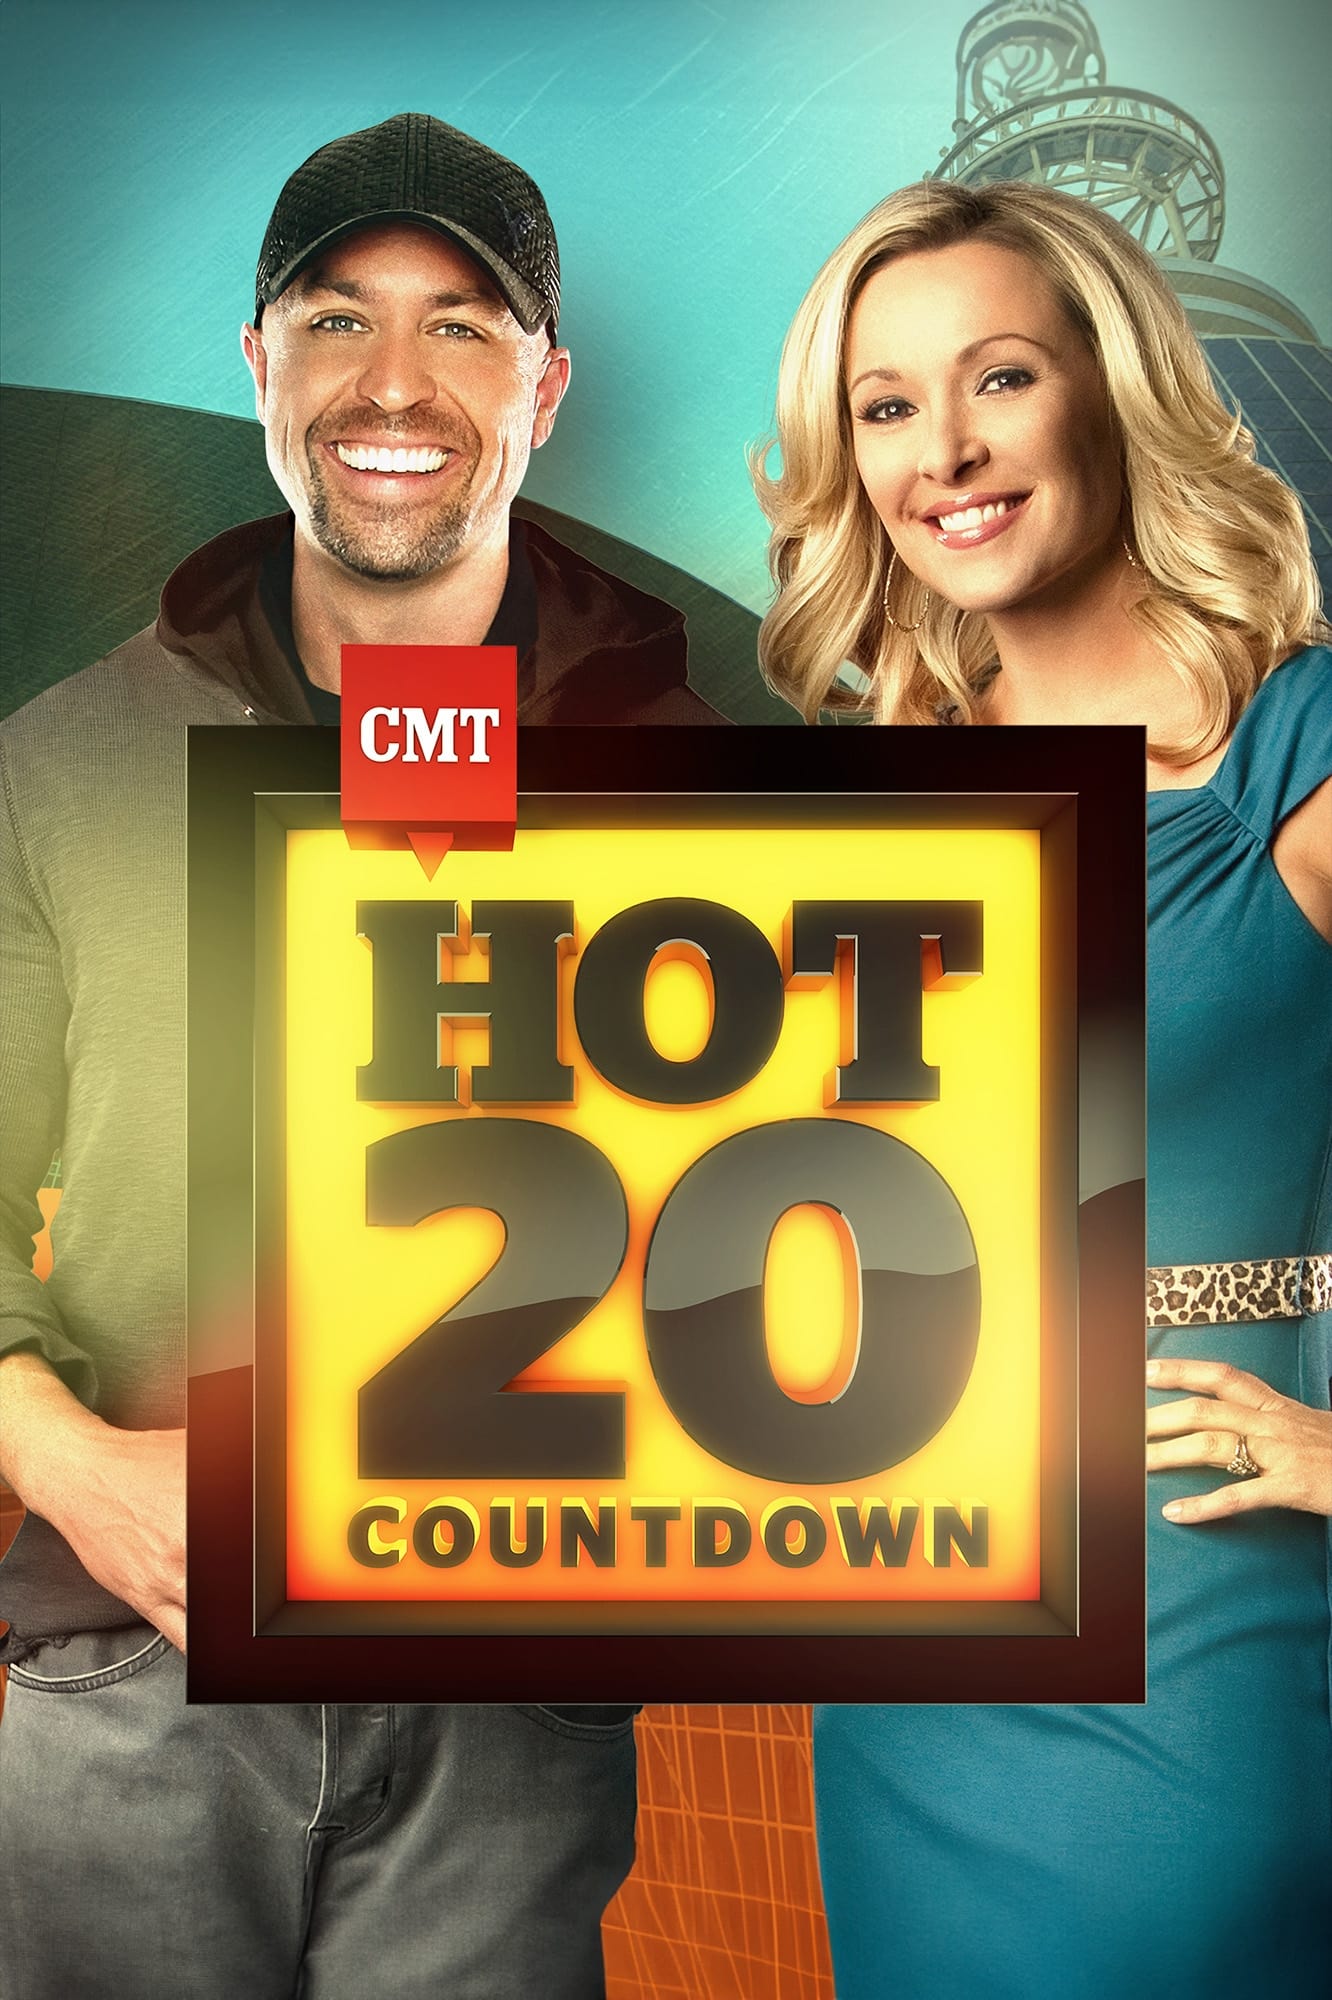 CMT Hot 20 Countdown